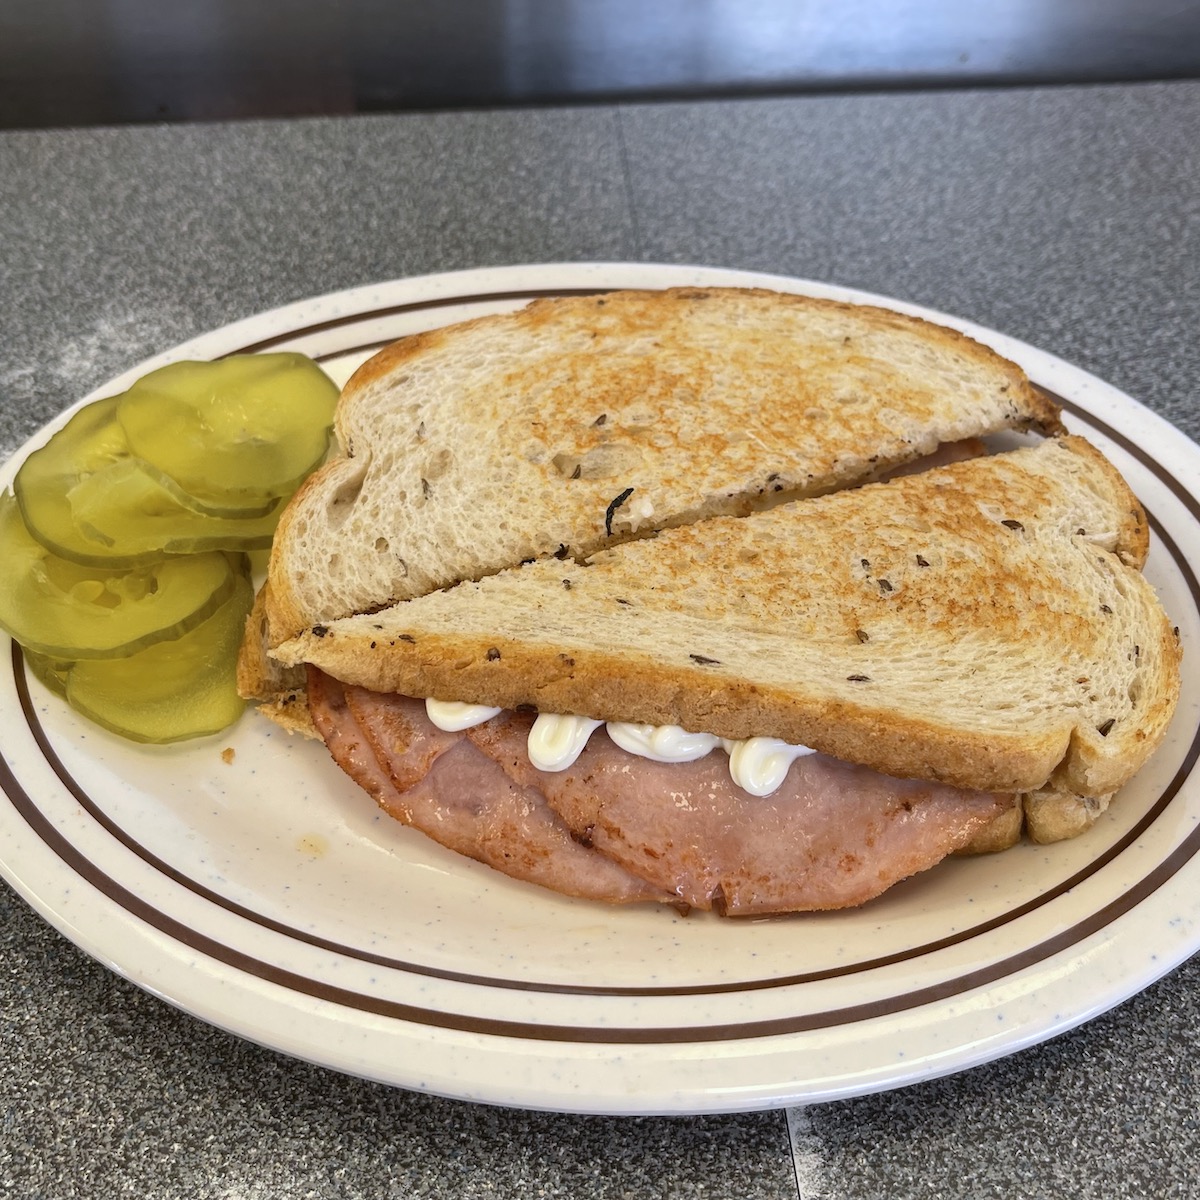 Hot Ham and Swiss Cheese on Rye from Gordon's Stoplight in Crystal City, Missouri